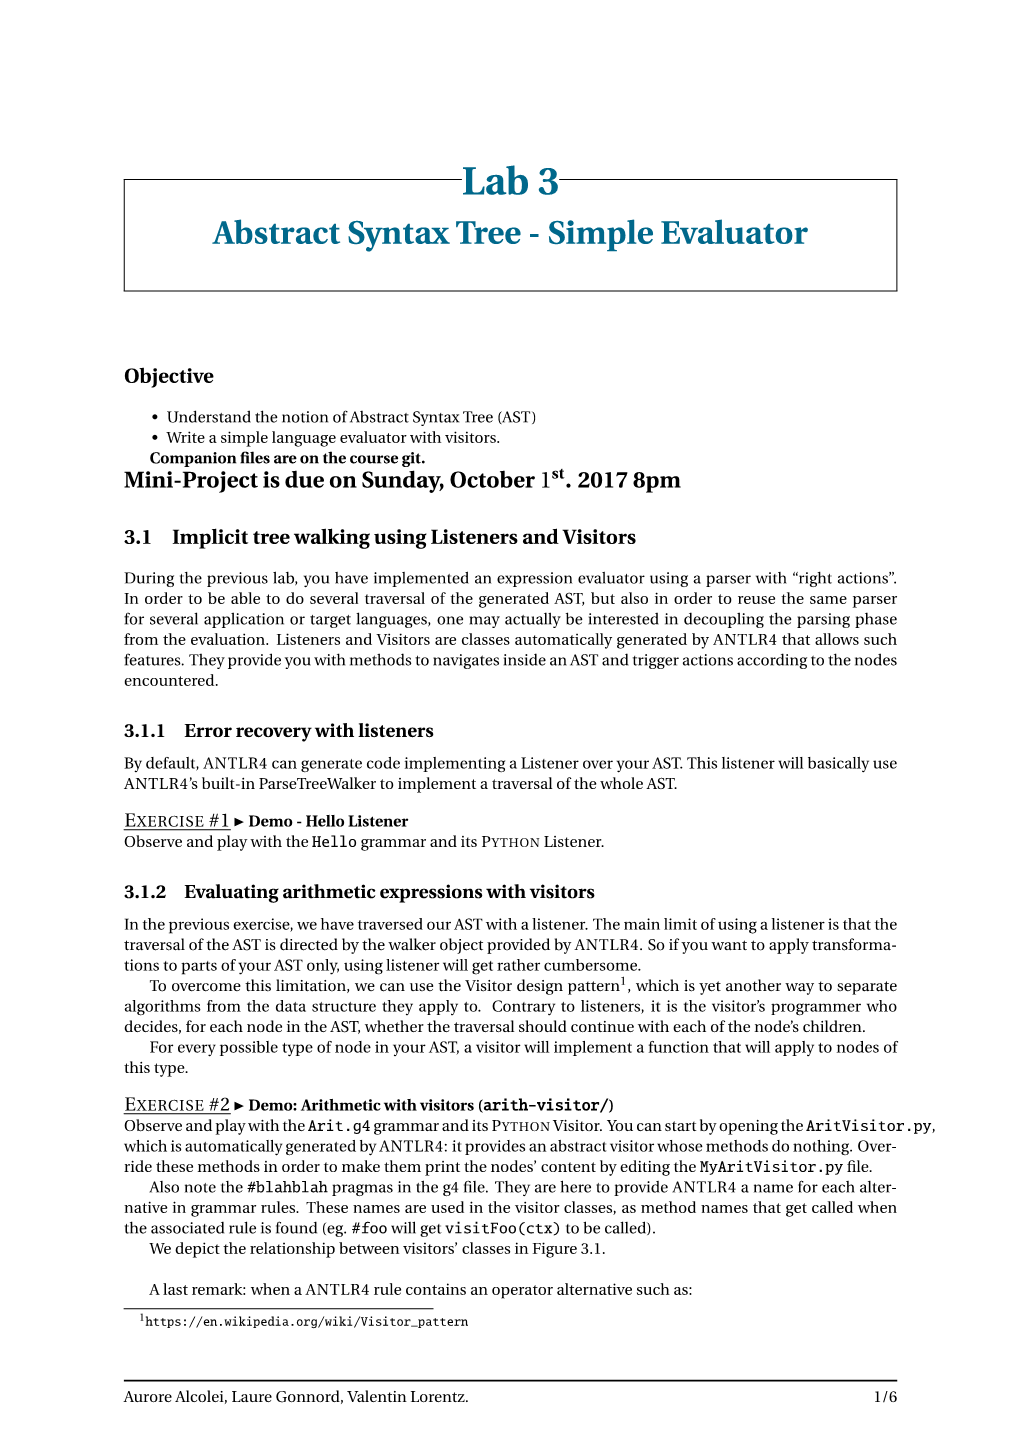 Abstract Syntax Tree - Simple Evaluator